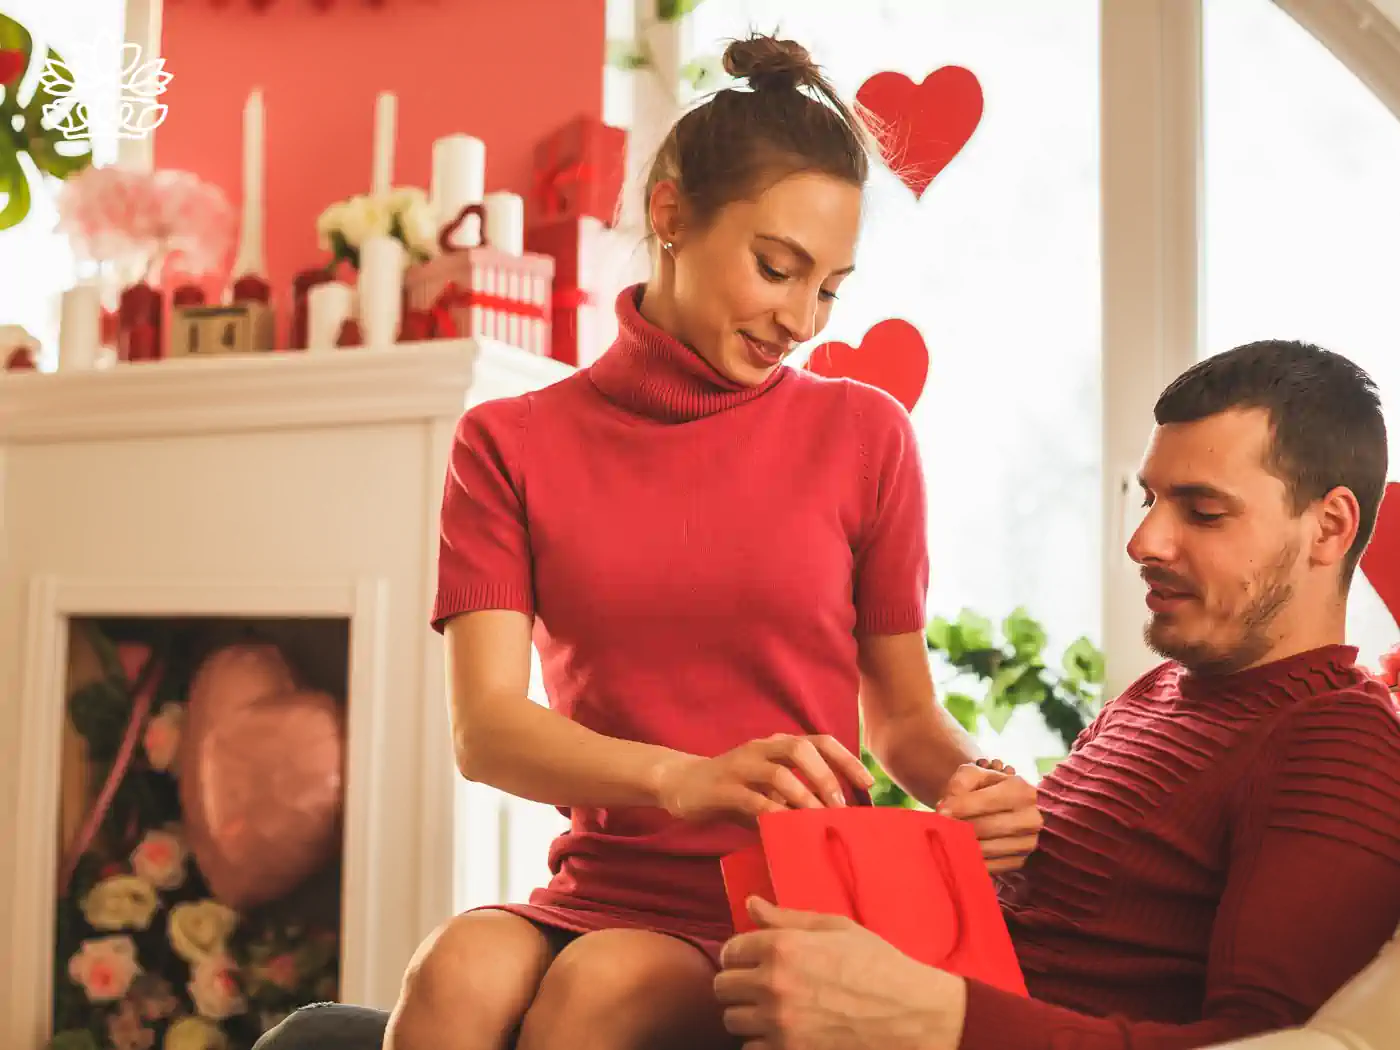 Woman in red sweater giving a Valentine's Day gift to a man in a cozy, heart-decorated living room. Fabulous Flowers and Gifts